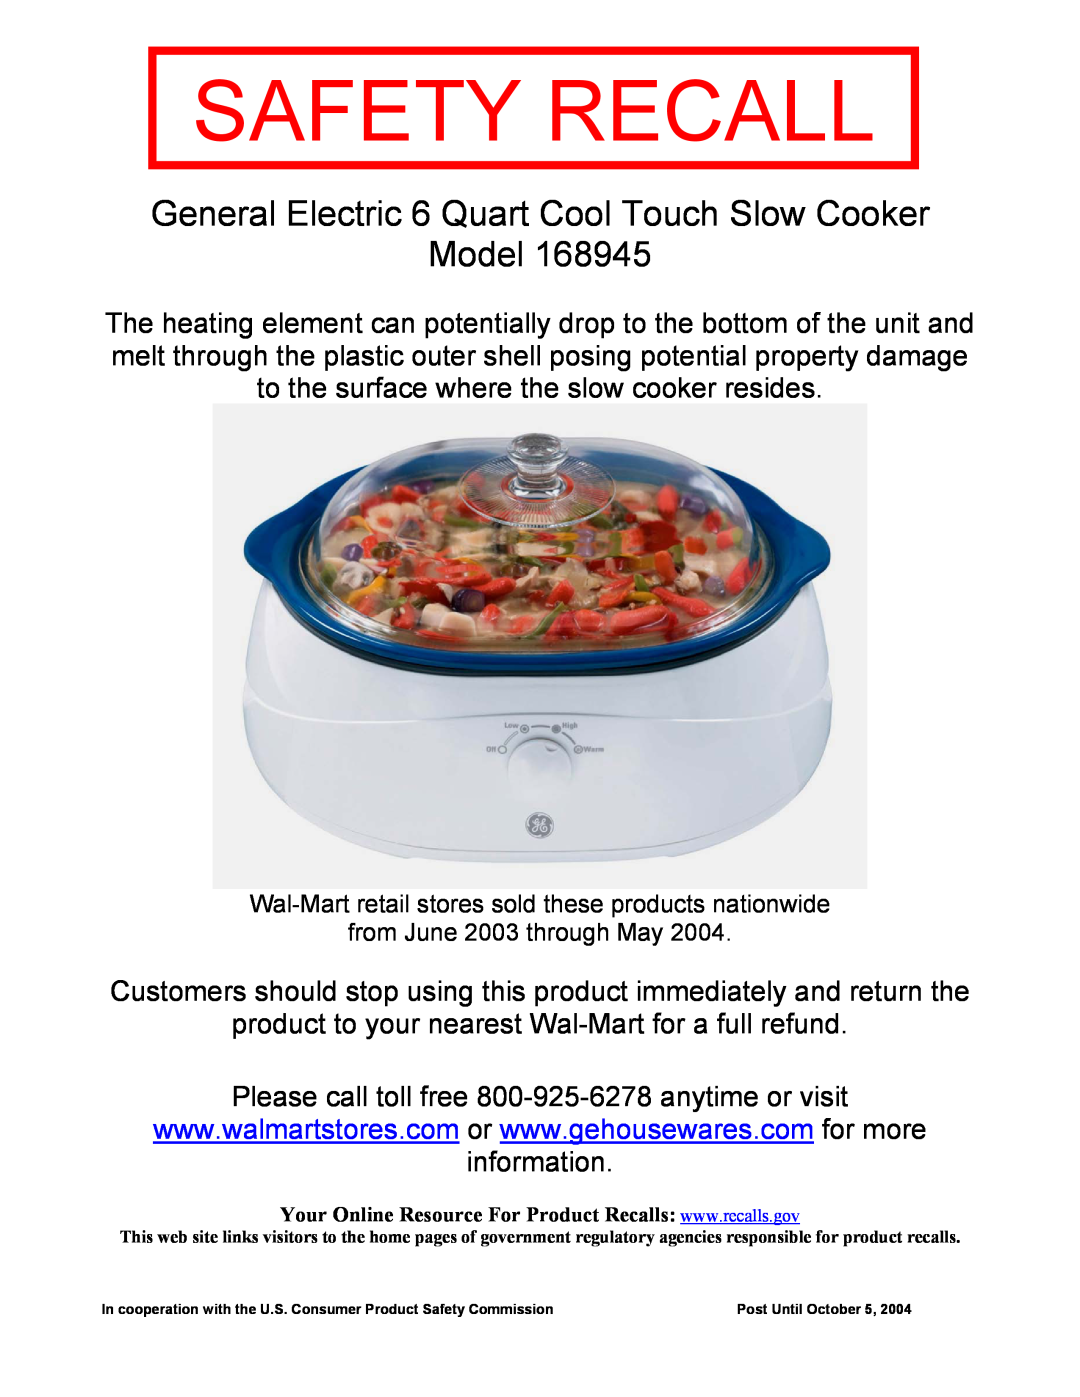 GE 168945 manual Safety Recall, General Electric 6 Quart Cool Touch Slow Cooker, Model 